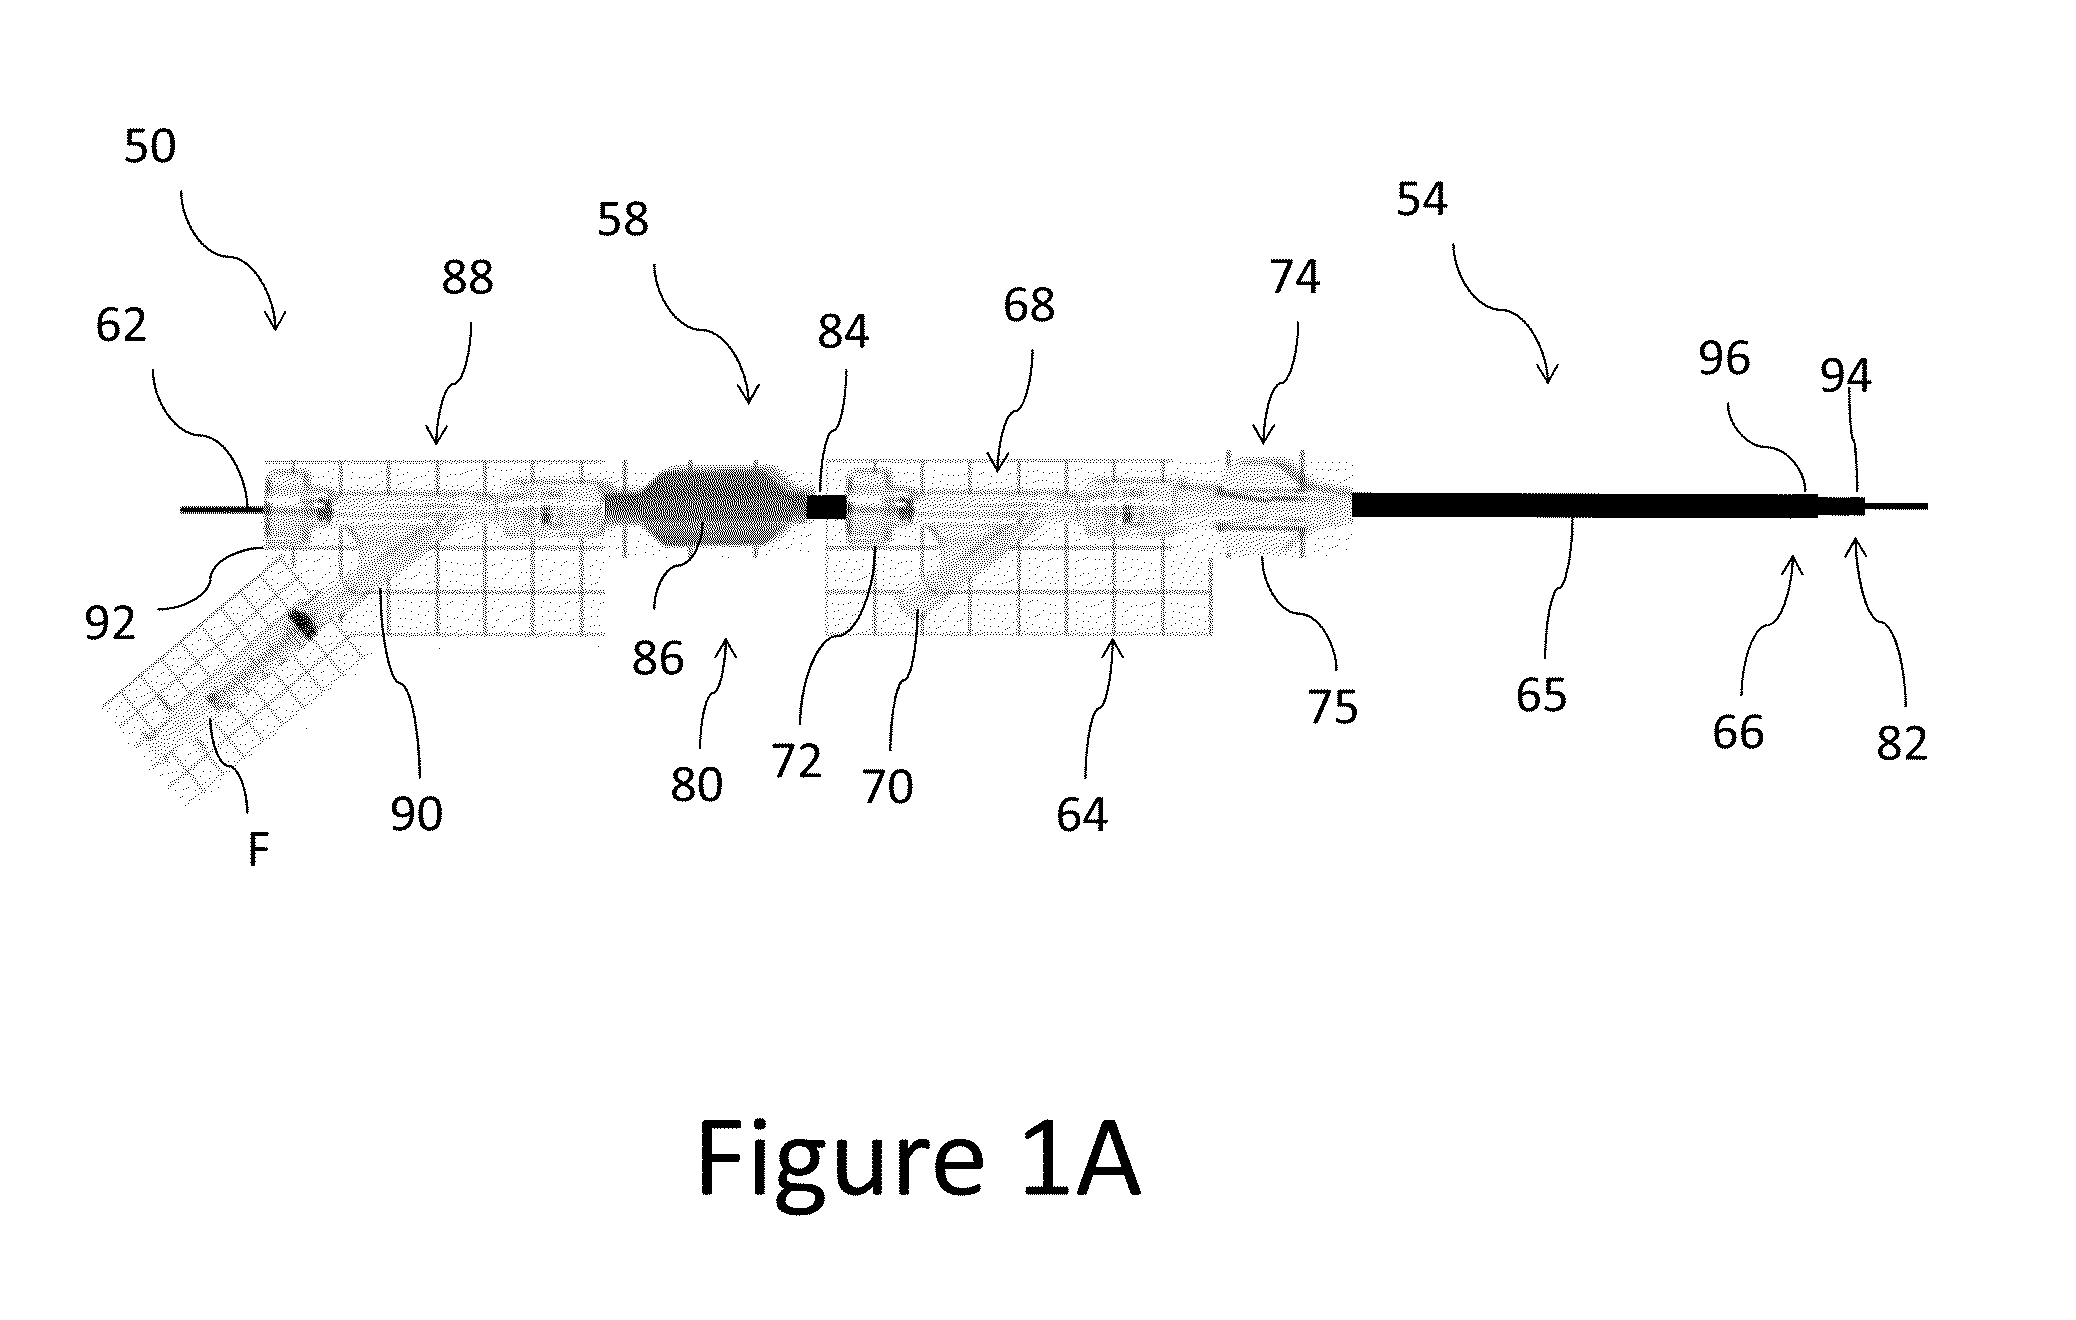 Catheter devices for crossing and treating an occlusion